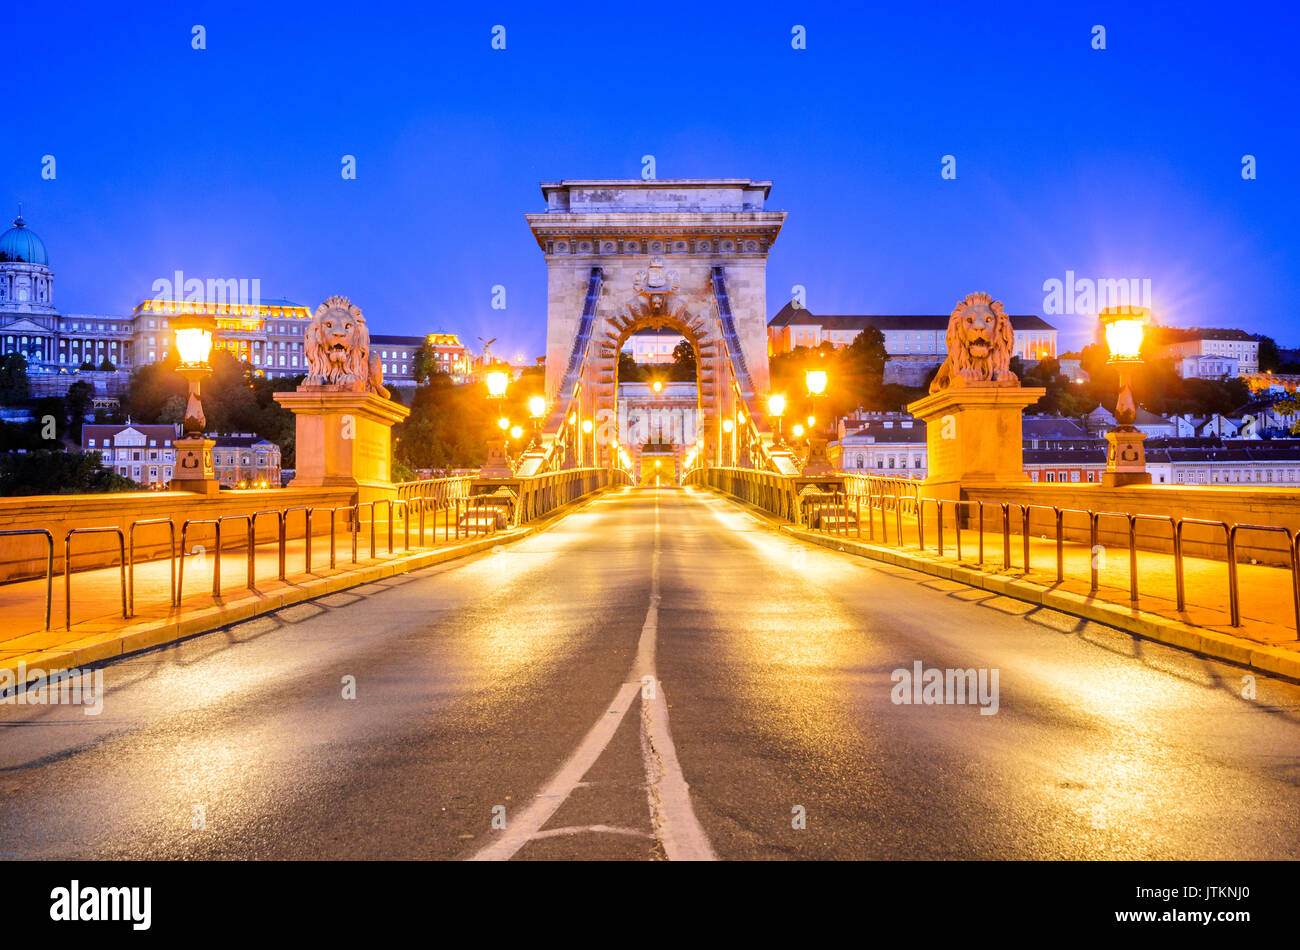 Budapest, Hungary - Chain Bridge, Szechenyi Lanchid. Suspension that spans the River Danube between Buda and Pest, in hungarian capital city. Stock Photo